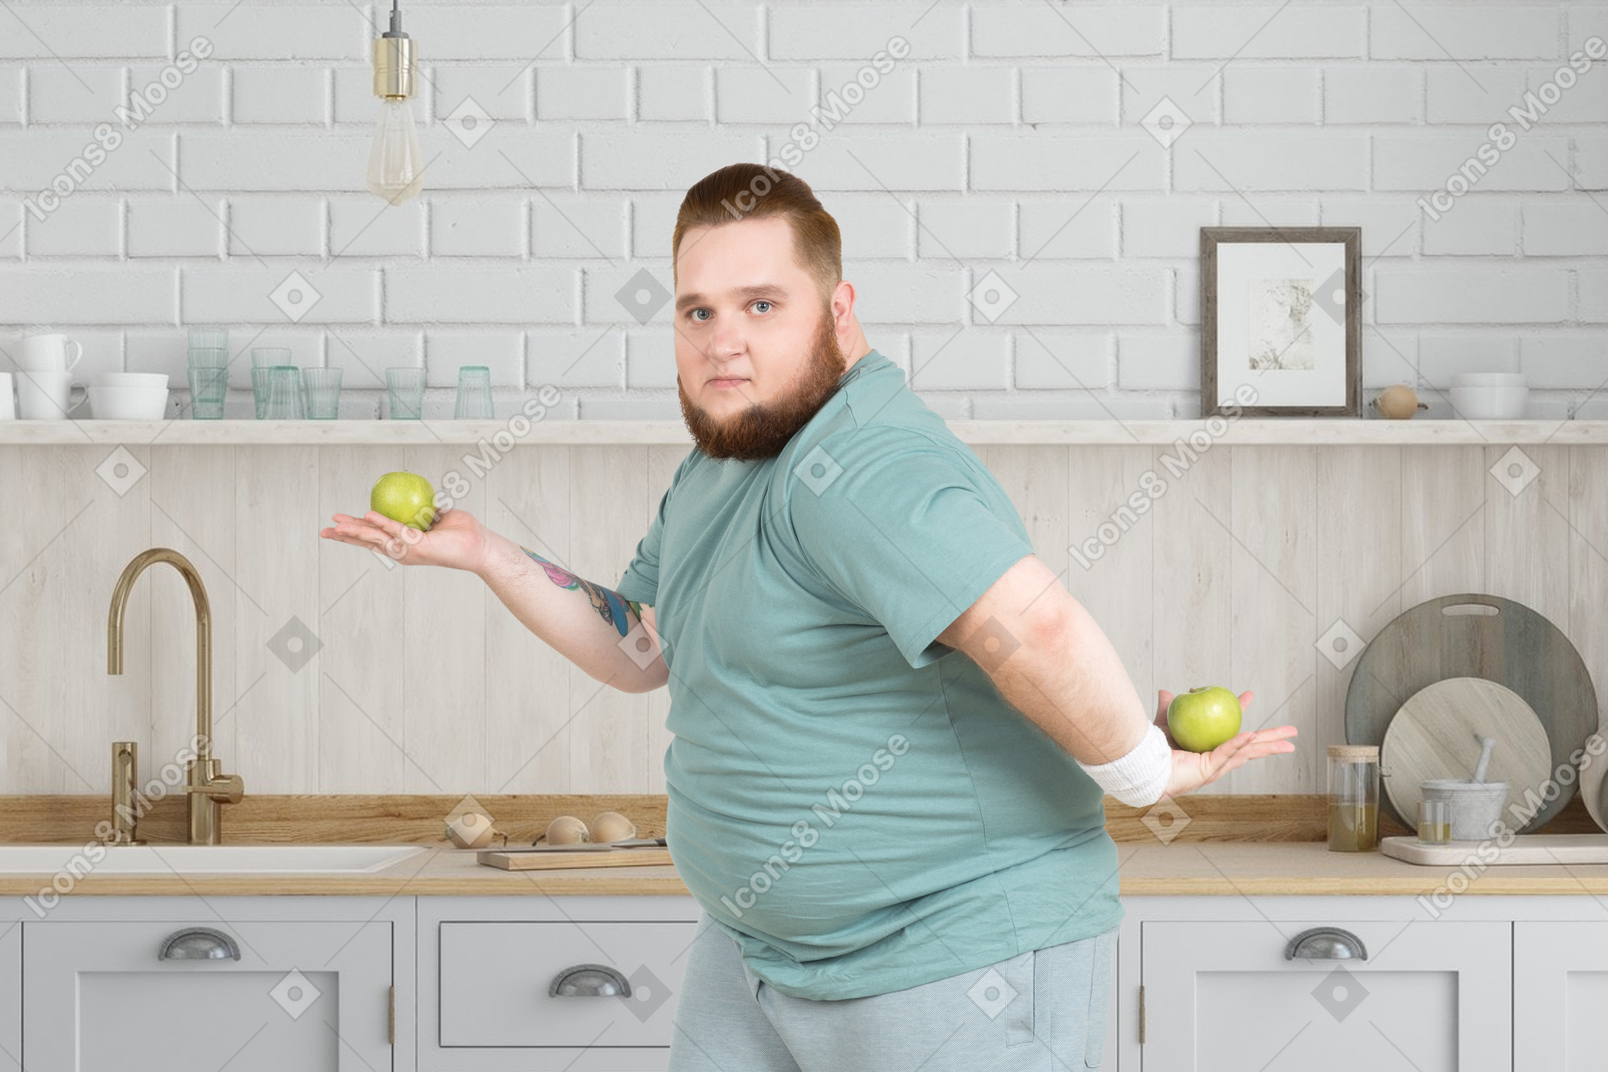 A fat man holding two apples in the kitchen